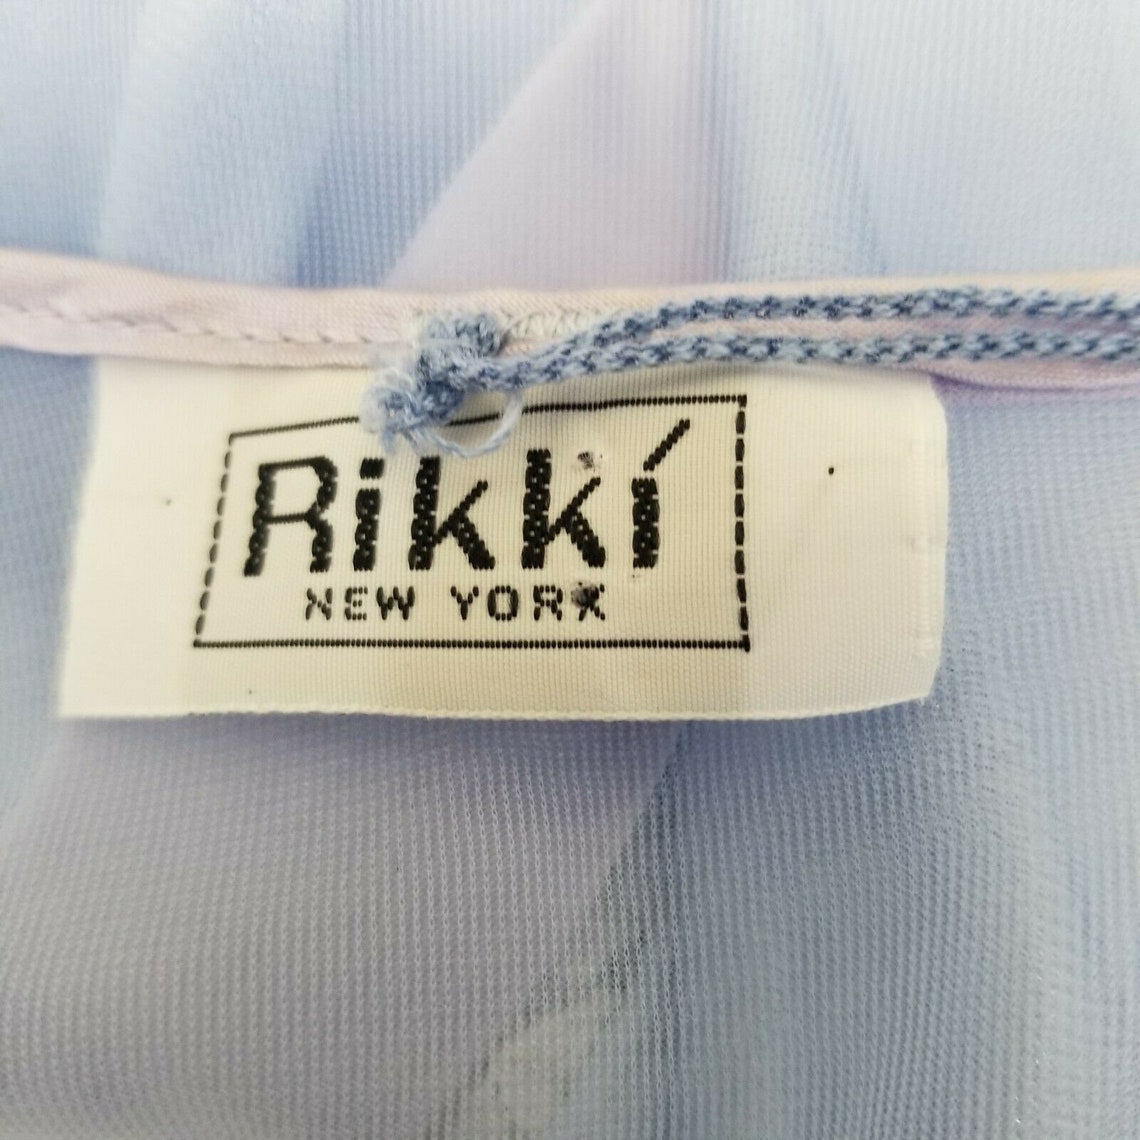 Rikki M Blue Nightgown Robe Lingerie Sheer Lacy Lace Vintage 2 | Etsy